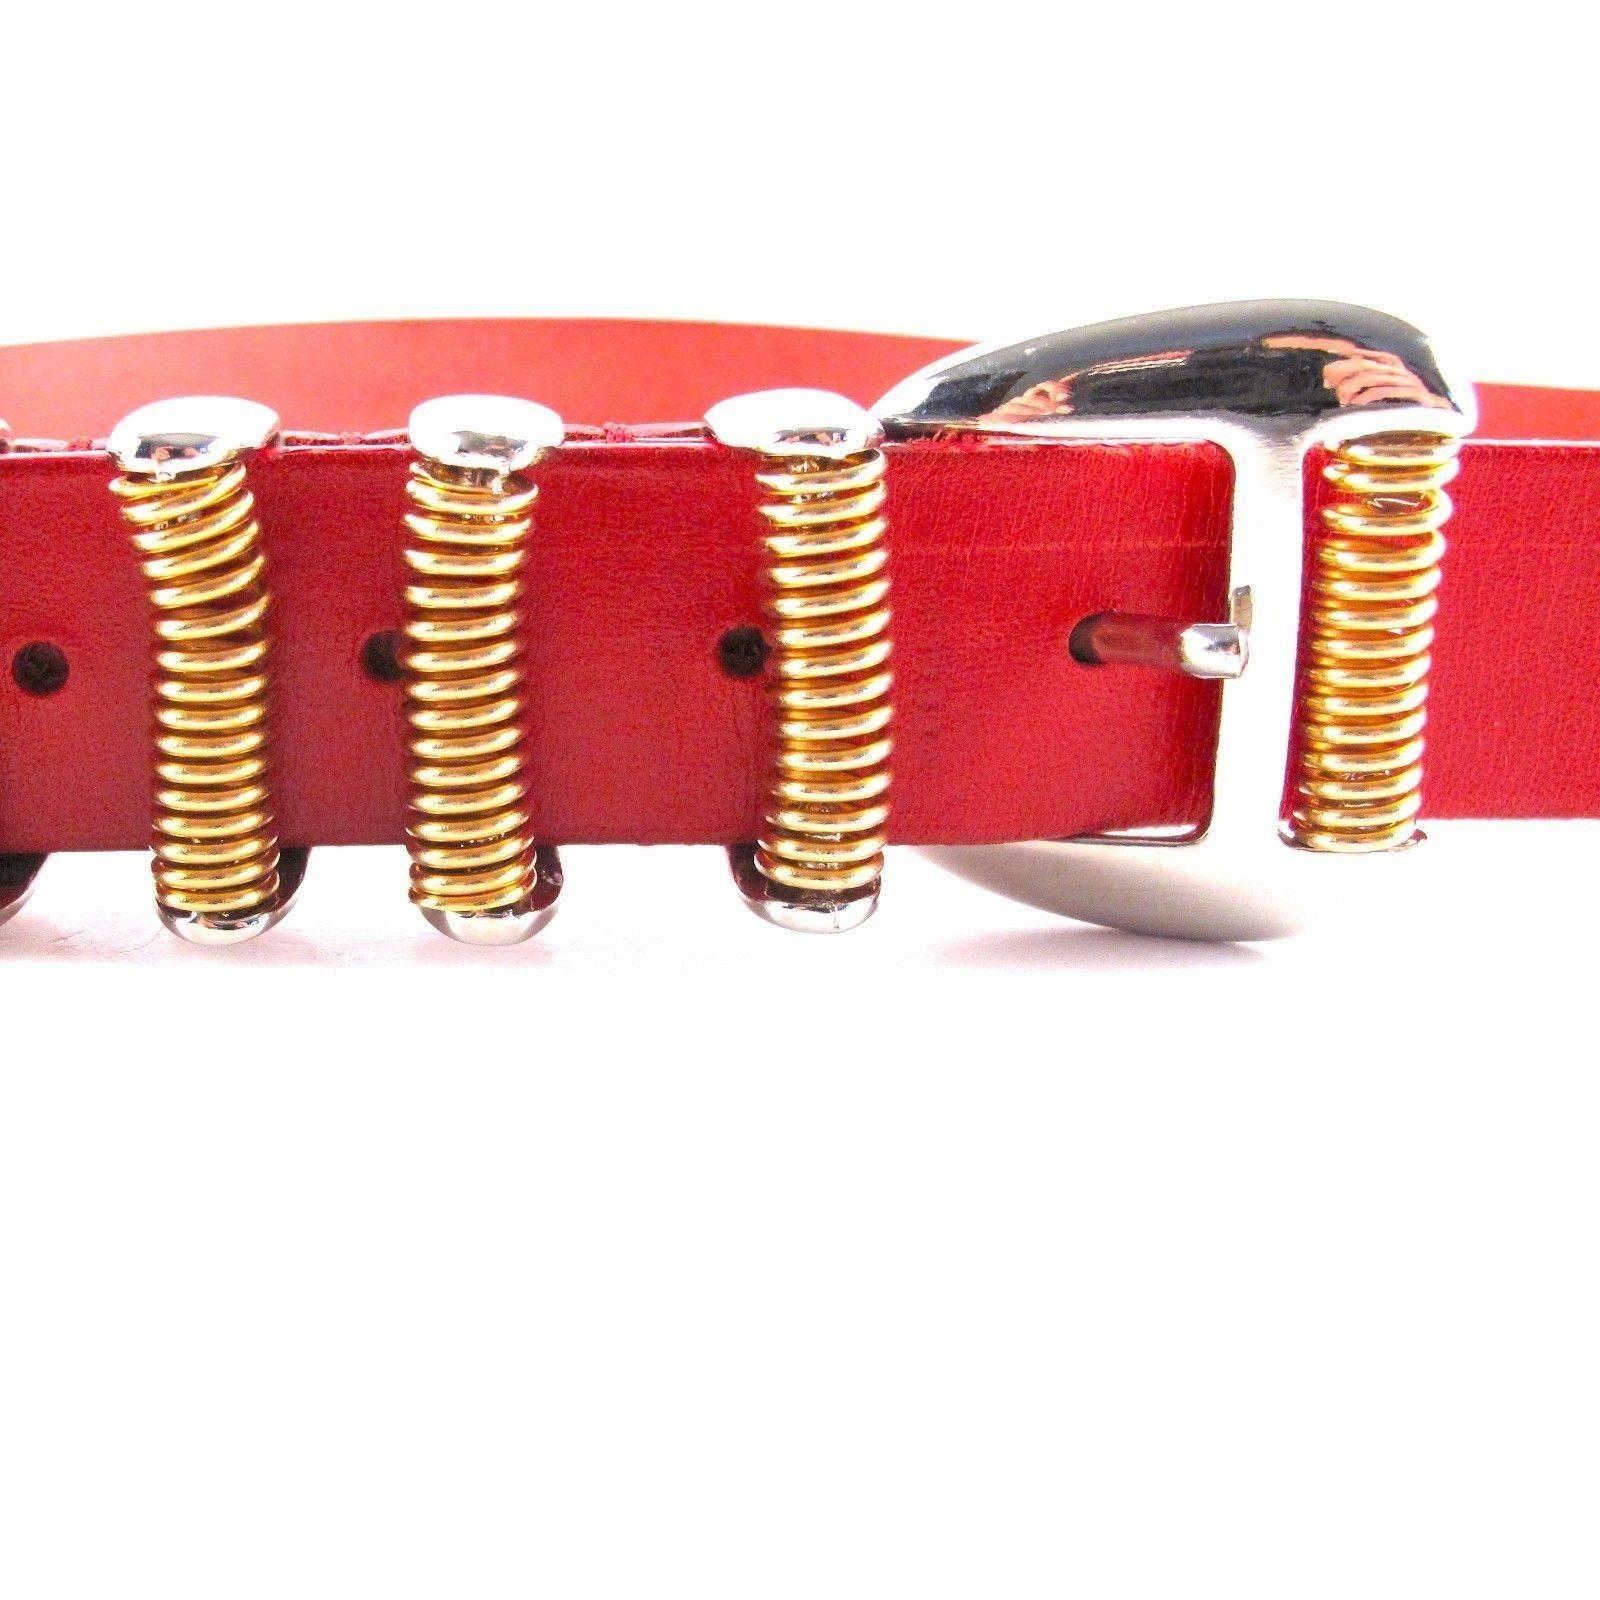 Balmain - Leather Belt

Color: Red

Material: Leather

Size:  40 - Large - Fits a 30" to 36" waist / hips

------------------------------------------------------------

Details:

- silver tone buckle

- gold tone coil